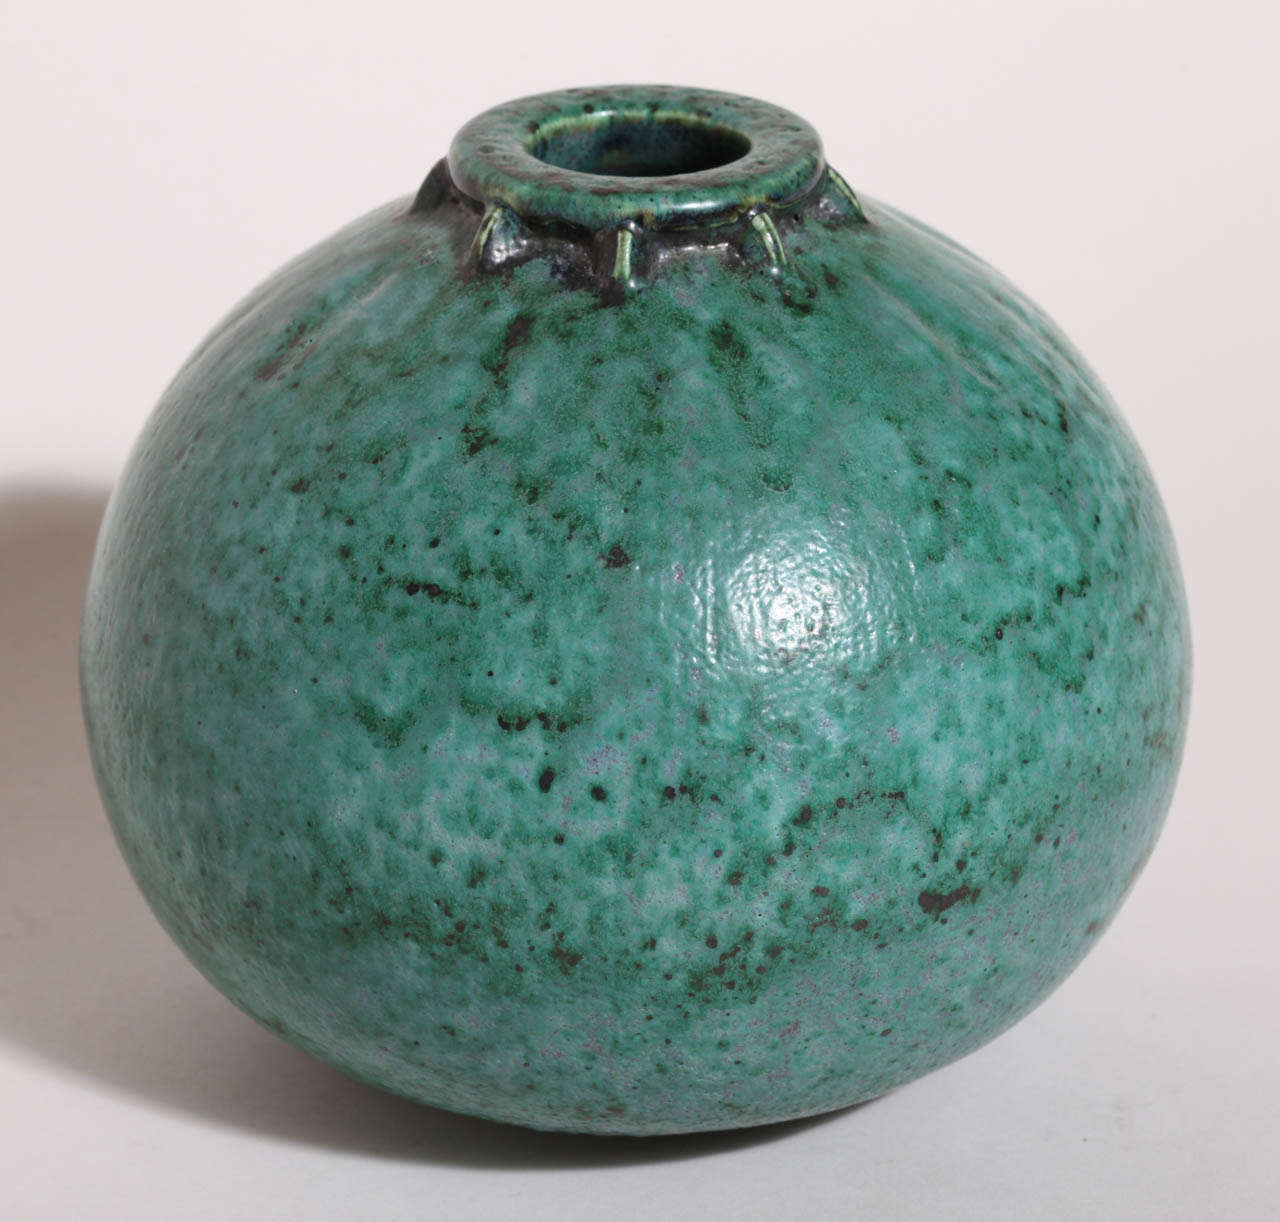 This spherical stoneware vase has a turquoise glaze with purple undertones, vertical indentions below the collar and vertical struts around the collar.
Signed: ED incised

Orphaned as a child, Decoeur served as an apprentice to Edmond Lachenal